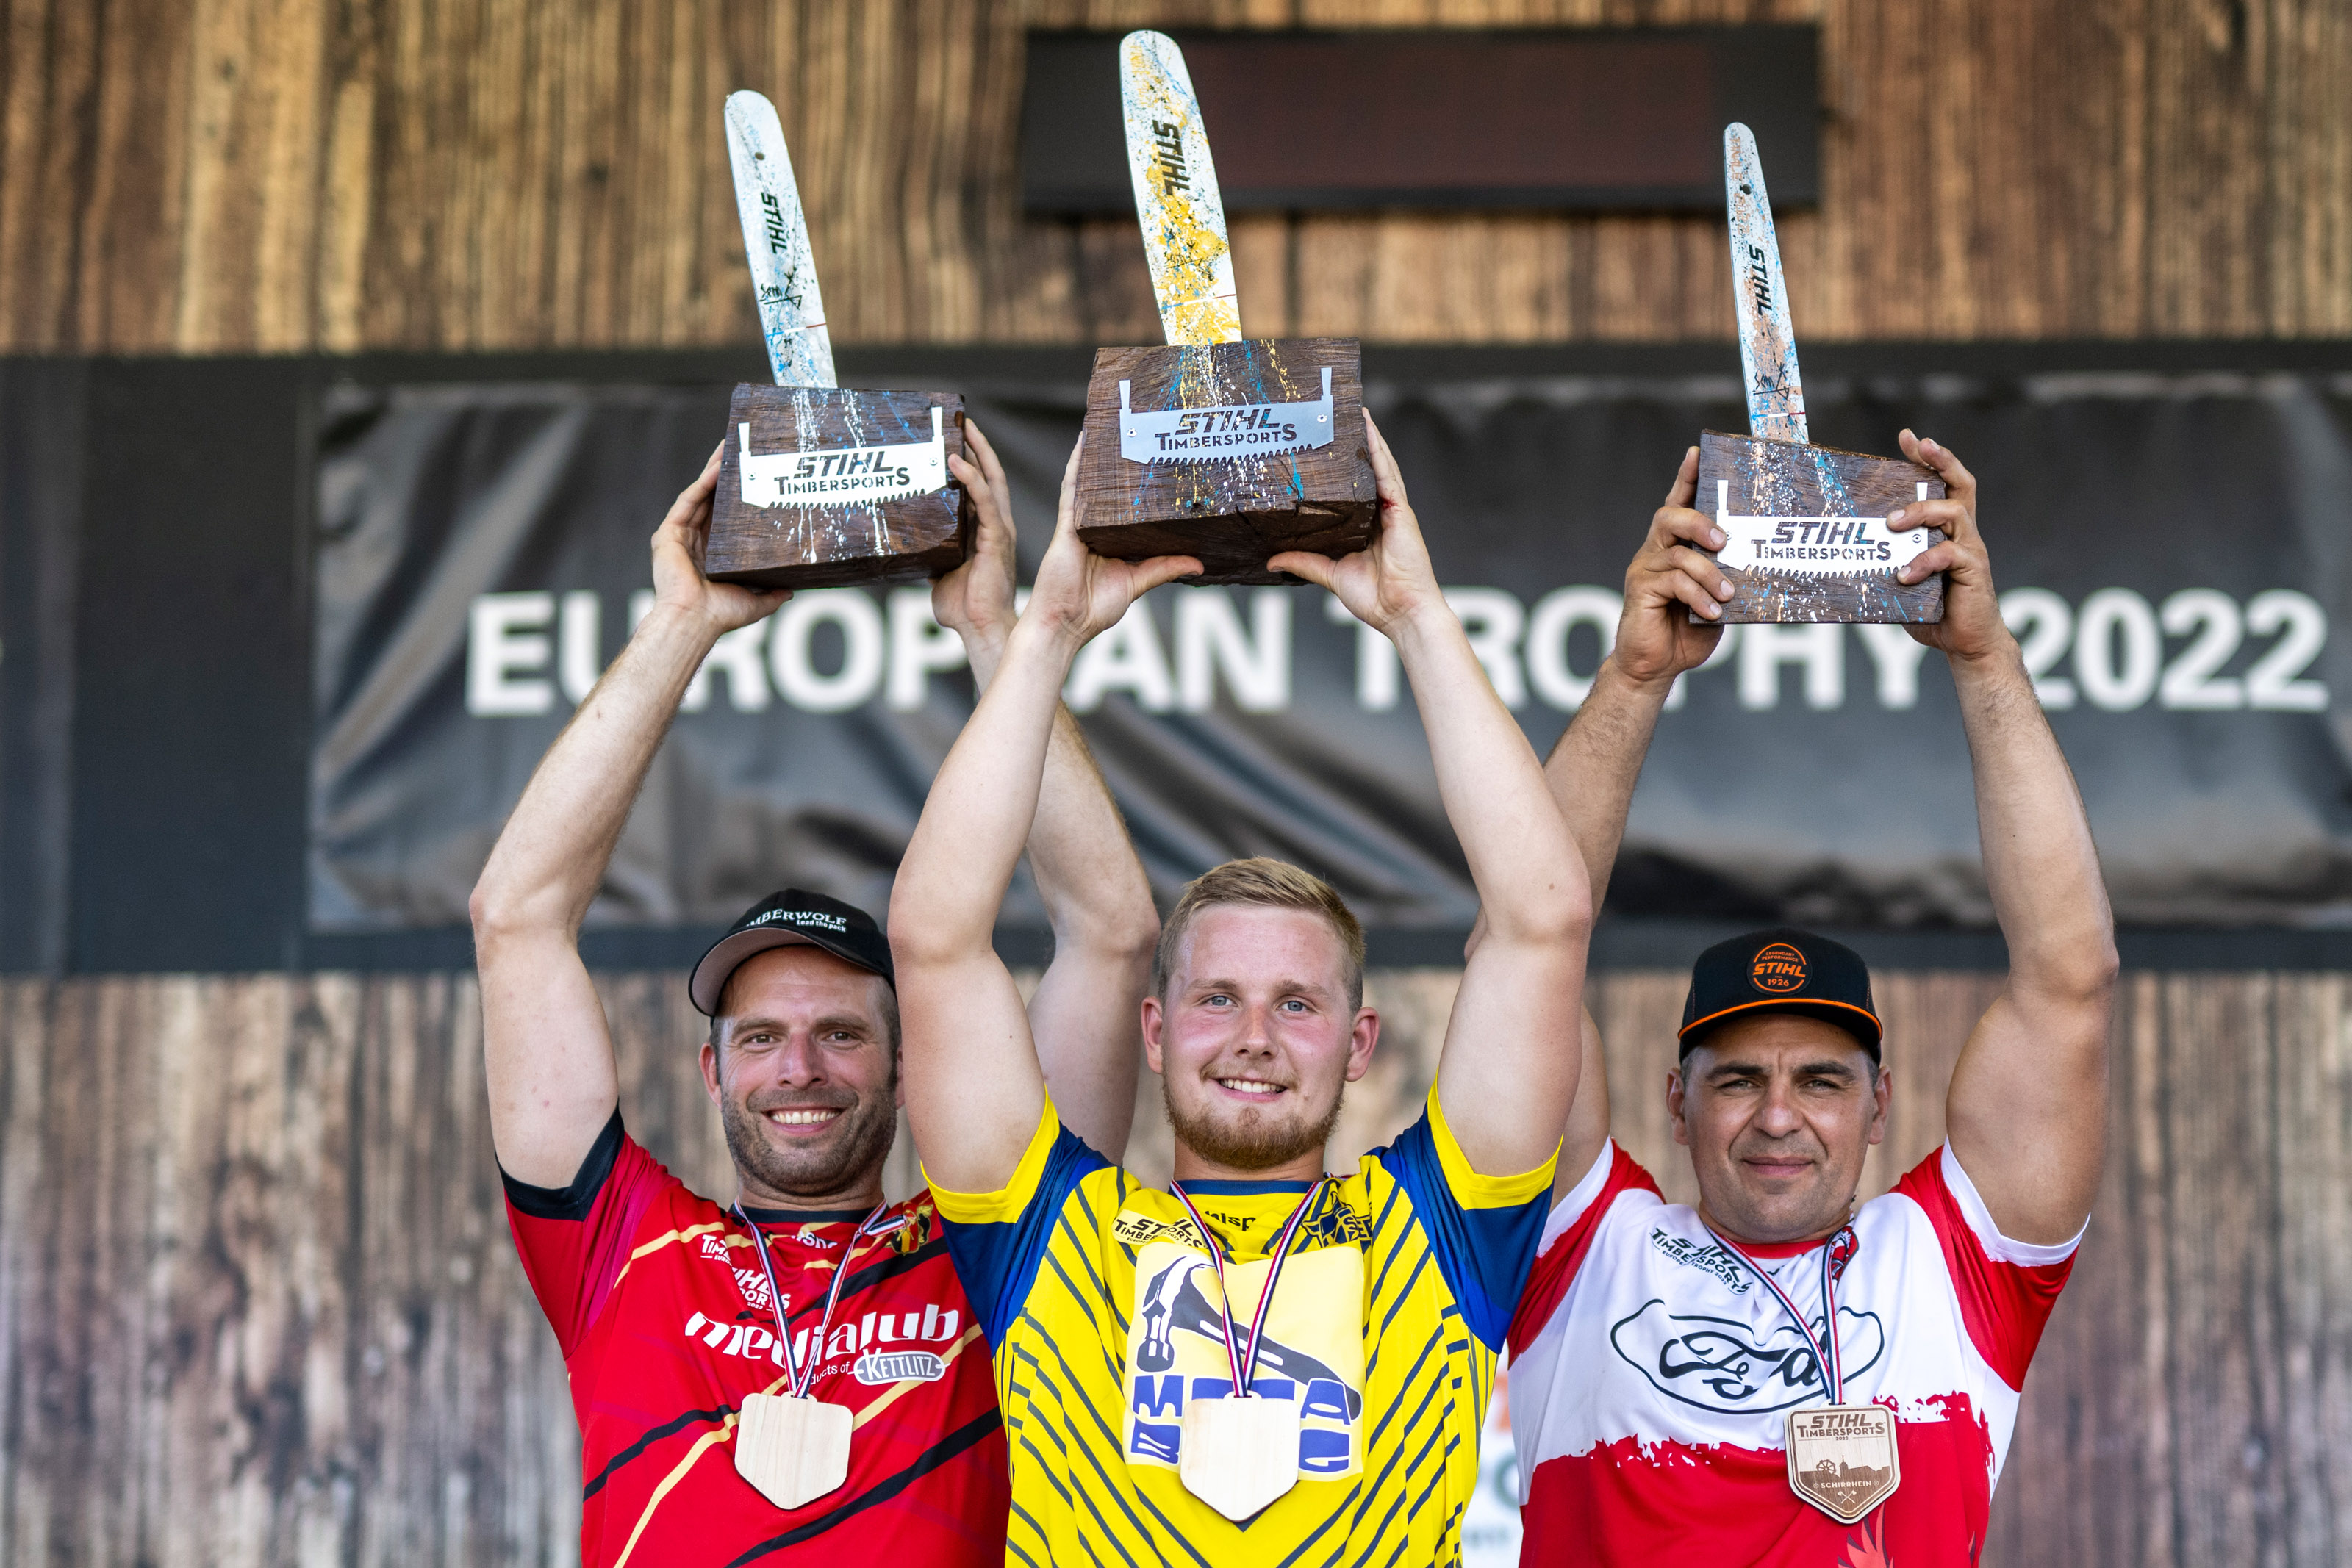 Hansson, Martens and Dubicki celebrate their podium finishes at the 2022 European Trophy.